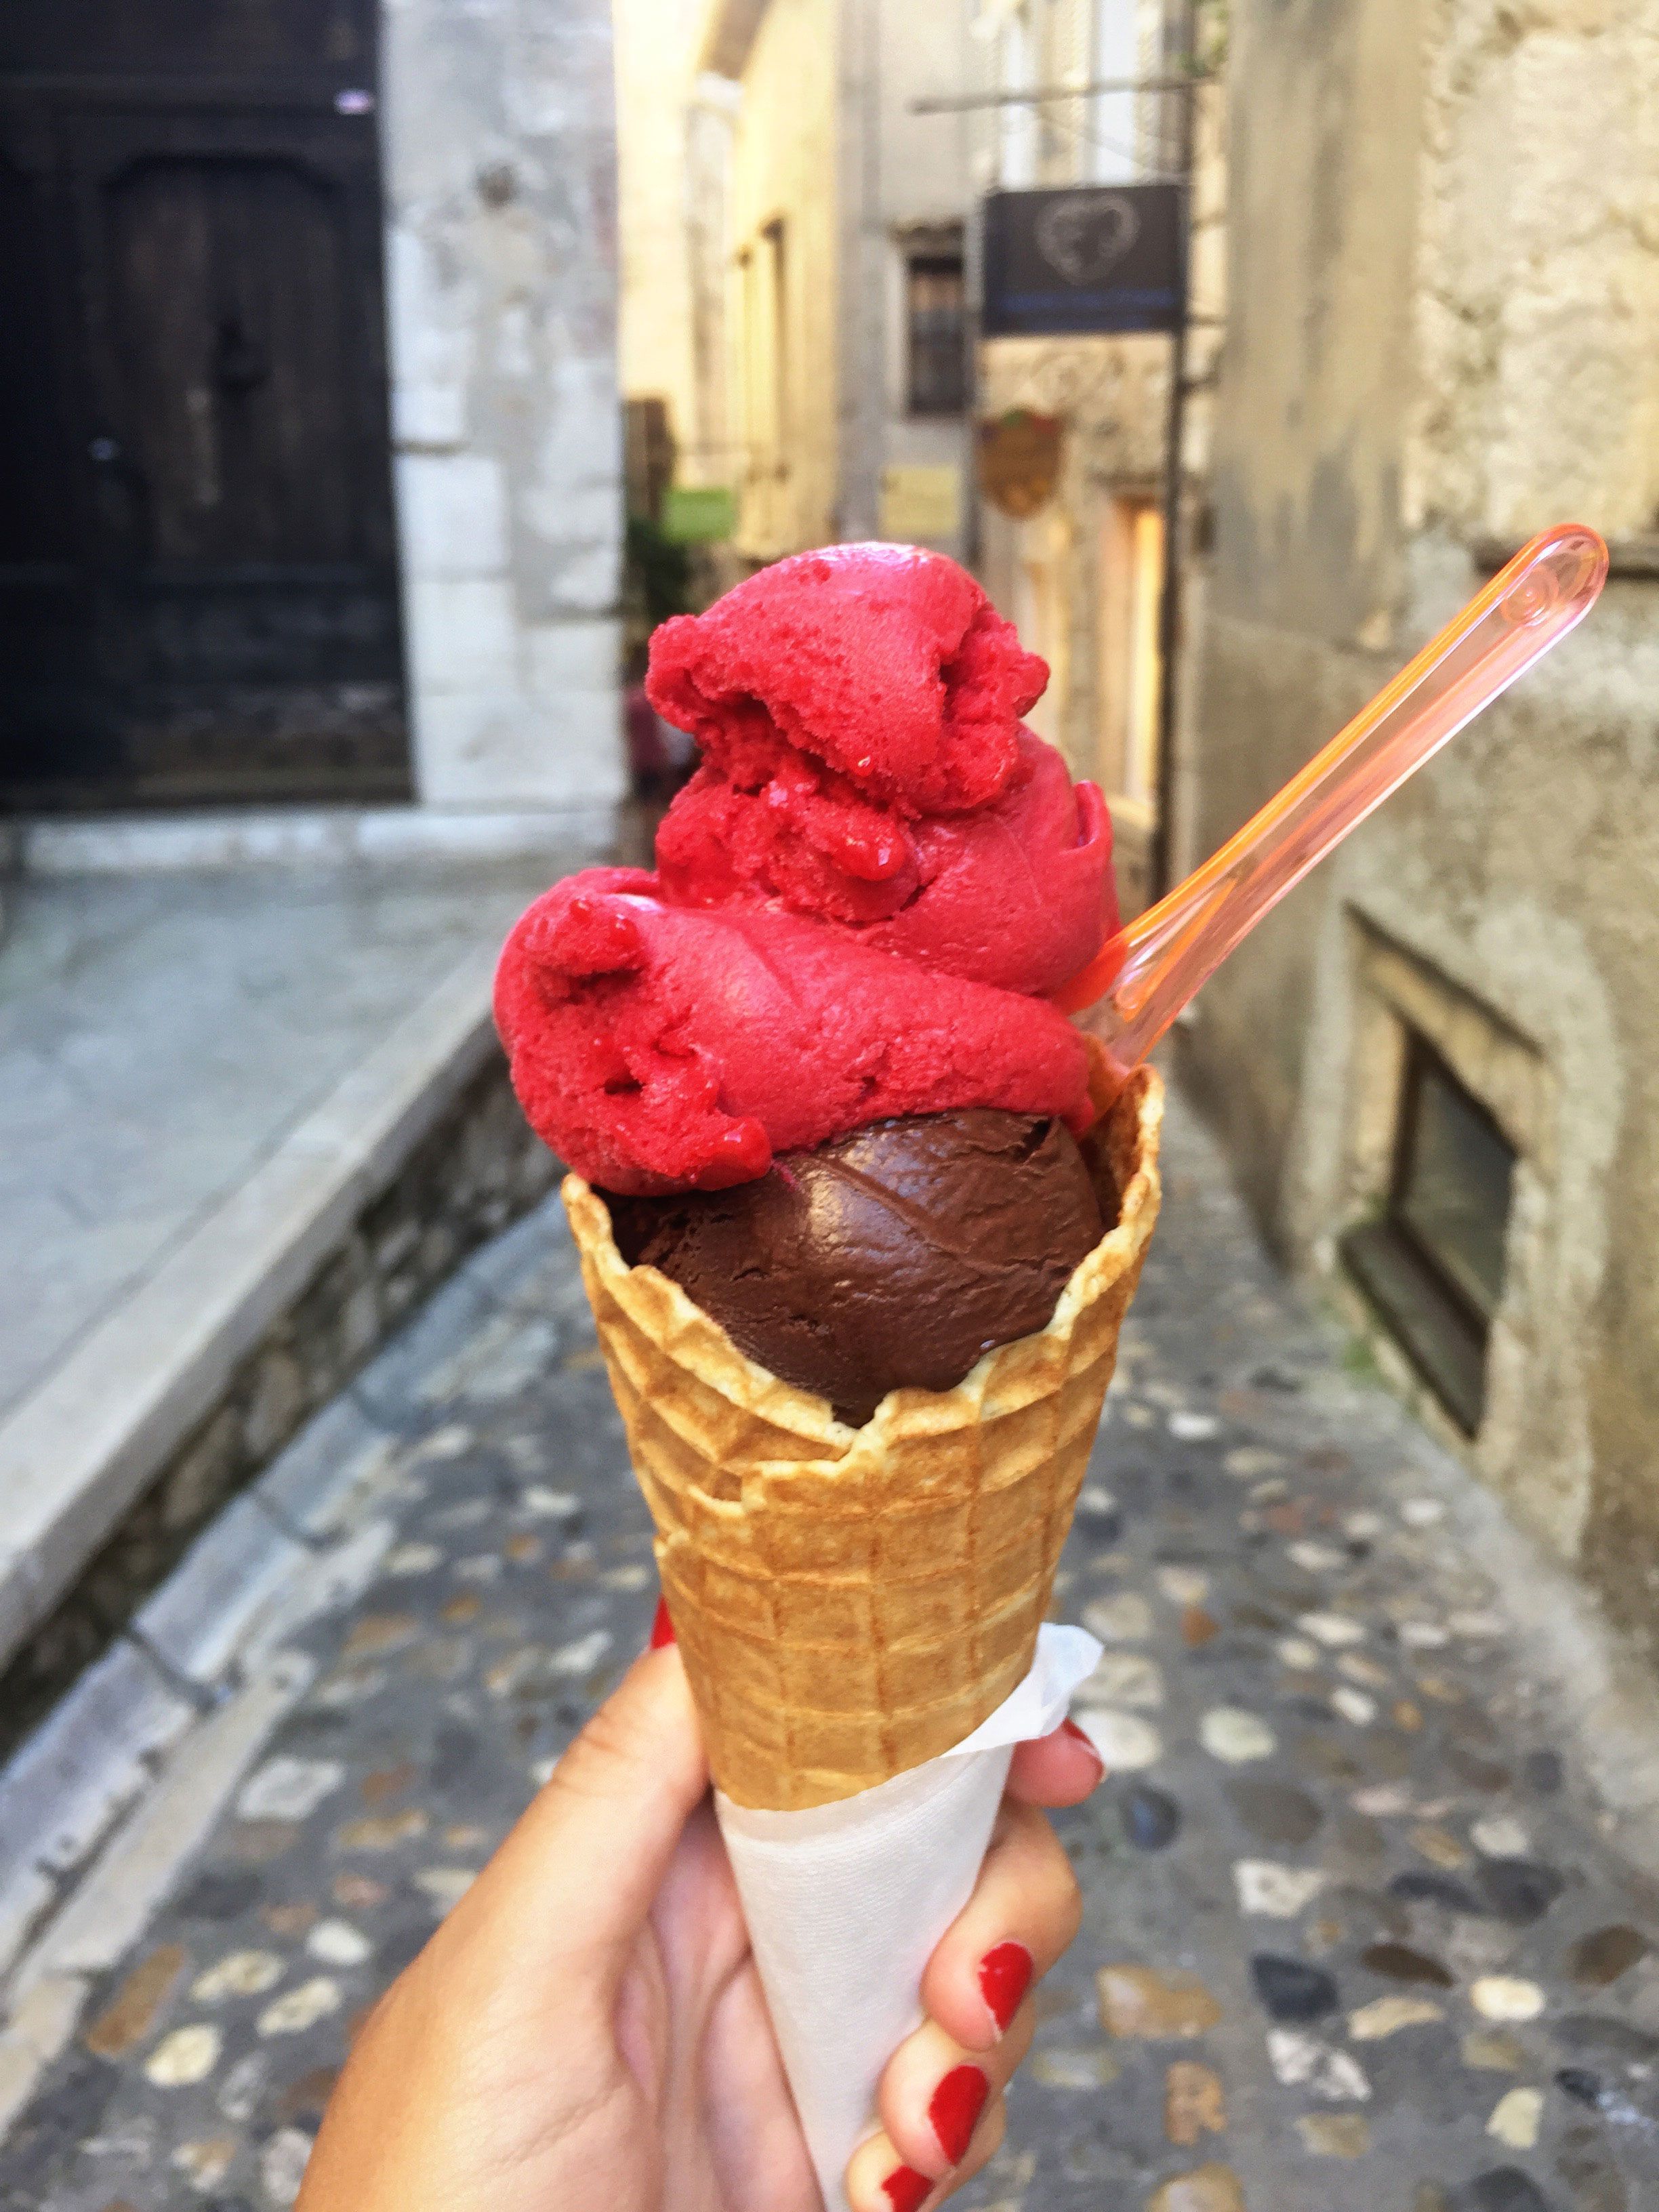 The Most Beautiful Ice Cream Shops in the World